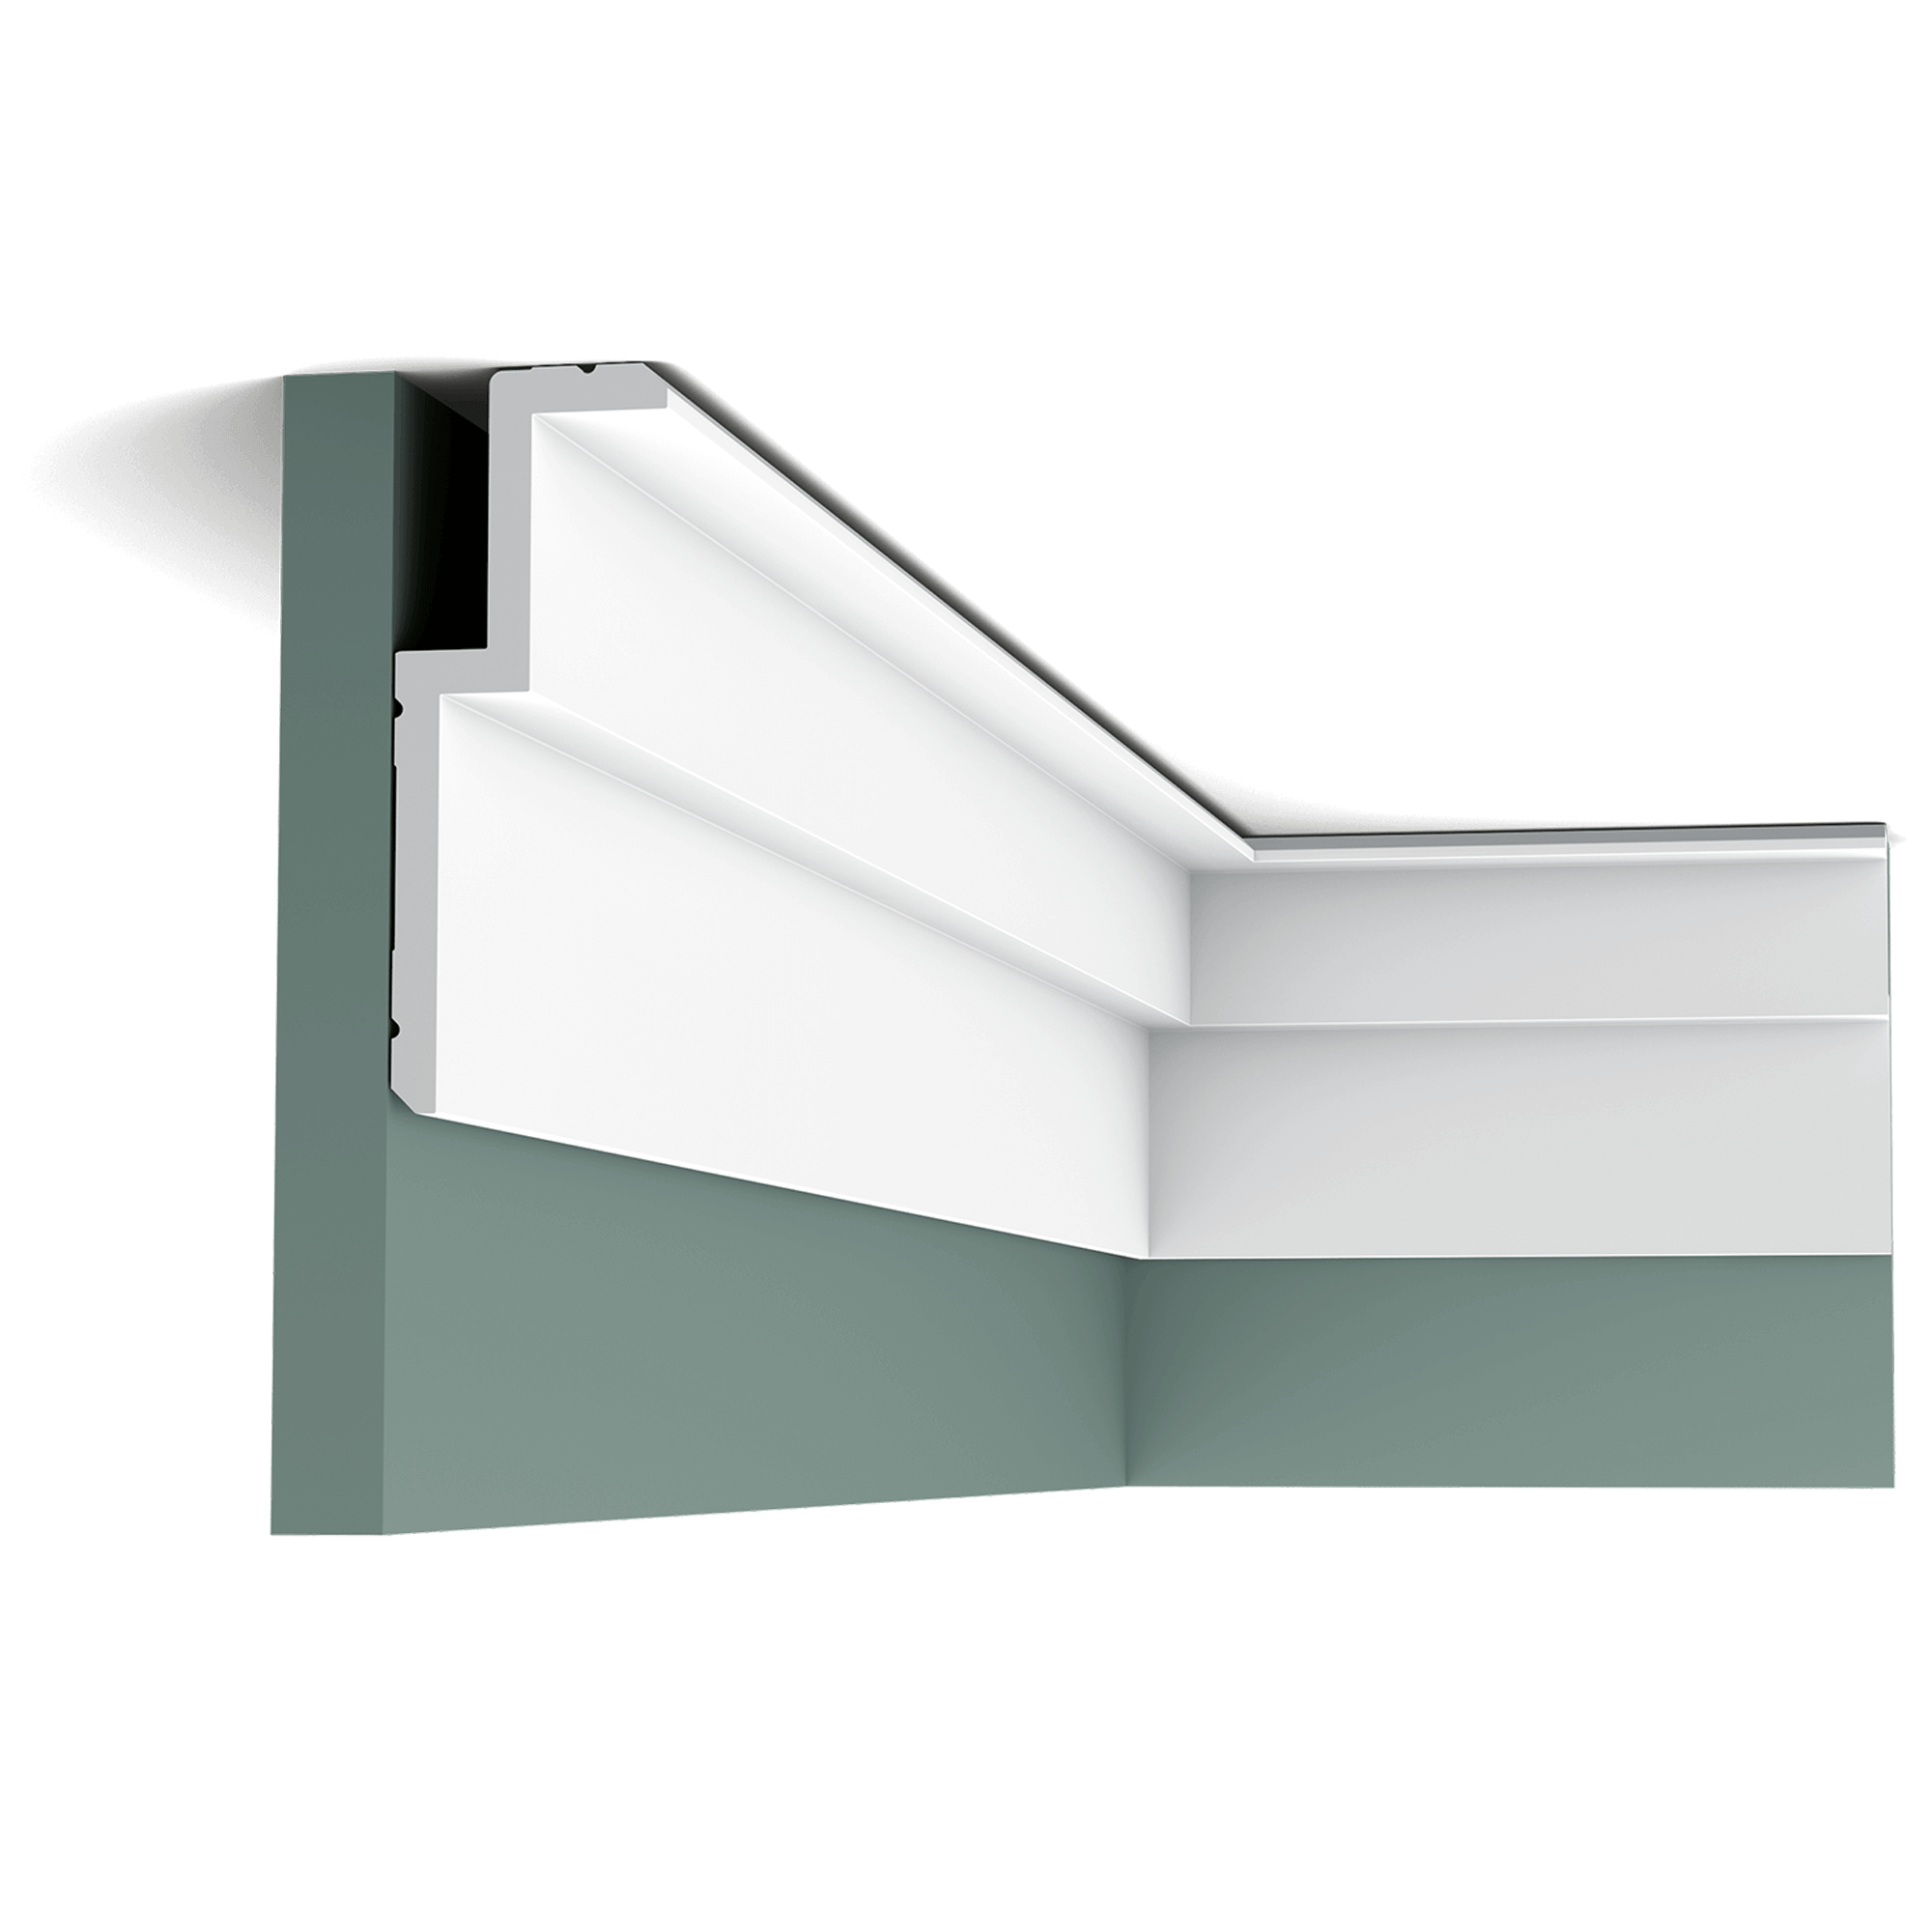 c391 border 44d3 A clean, modern profile from the Steps range. Here we fix the largest section to the wall for an elevated effect. The angled corners above and below provide additional subtle shadow lines. Designed by Orio Tonini.